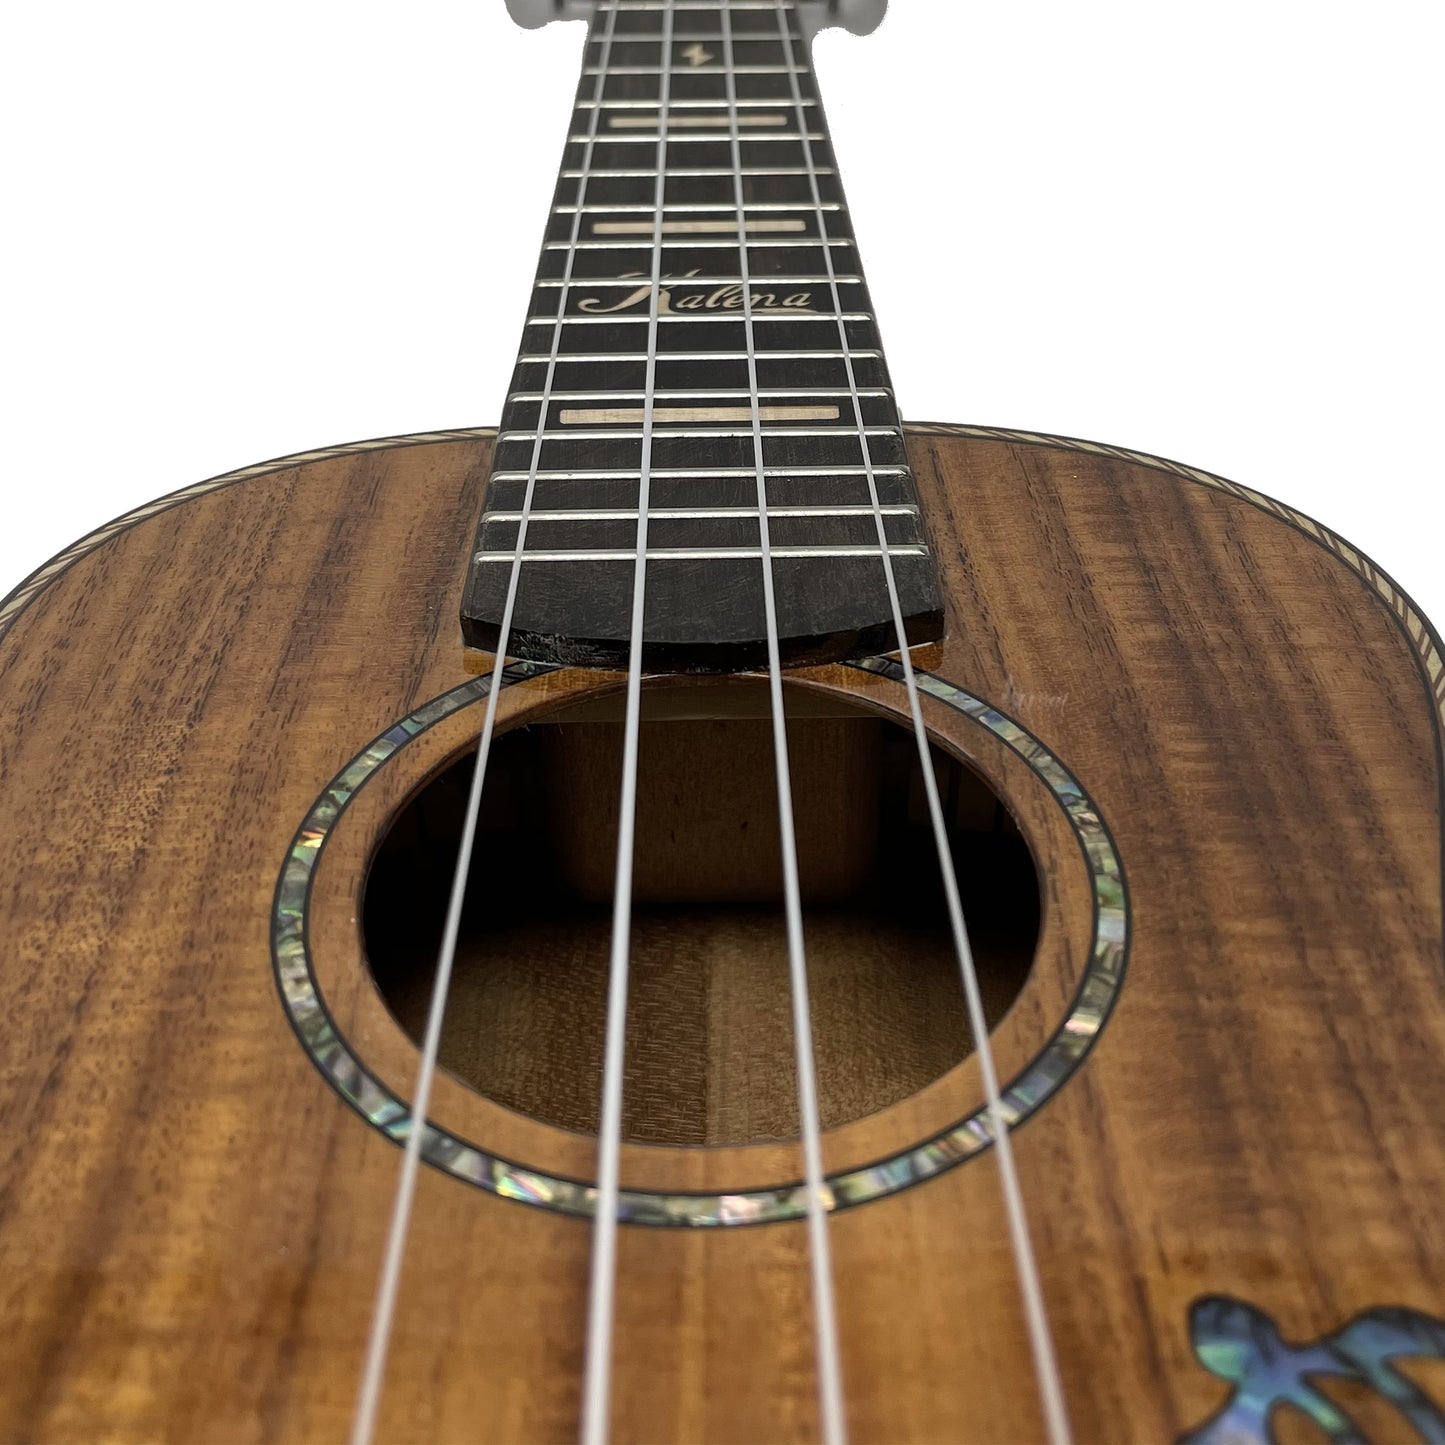 Kalena Concert Ukulele Solid Acacia Top Turtle Abalone Shell inlay high gloss Complete Set: Strings, Picks, Strap, Digital Tuner, Padded Case, Starter Guide